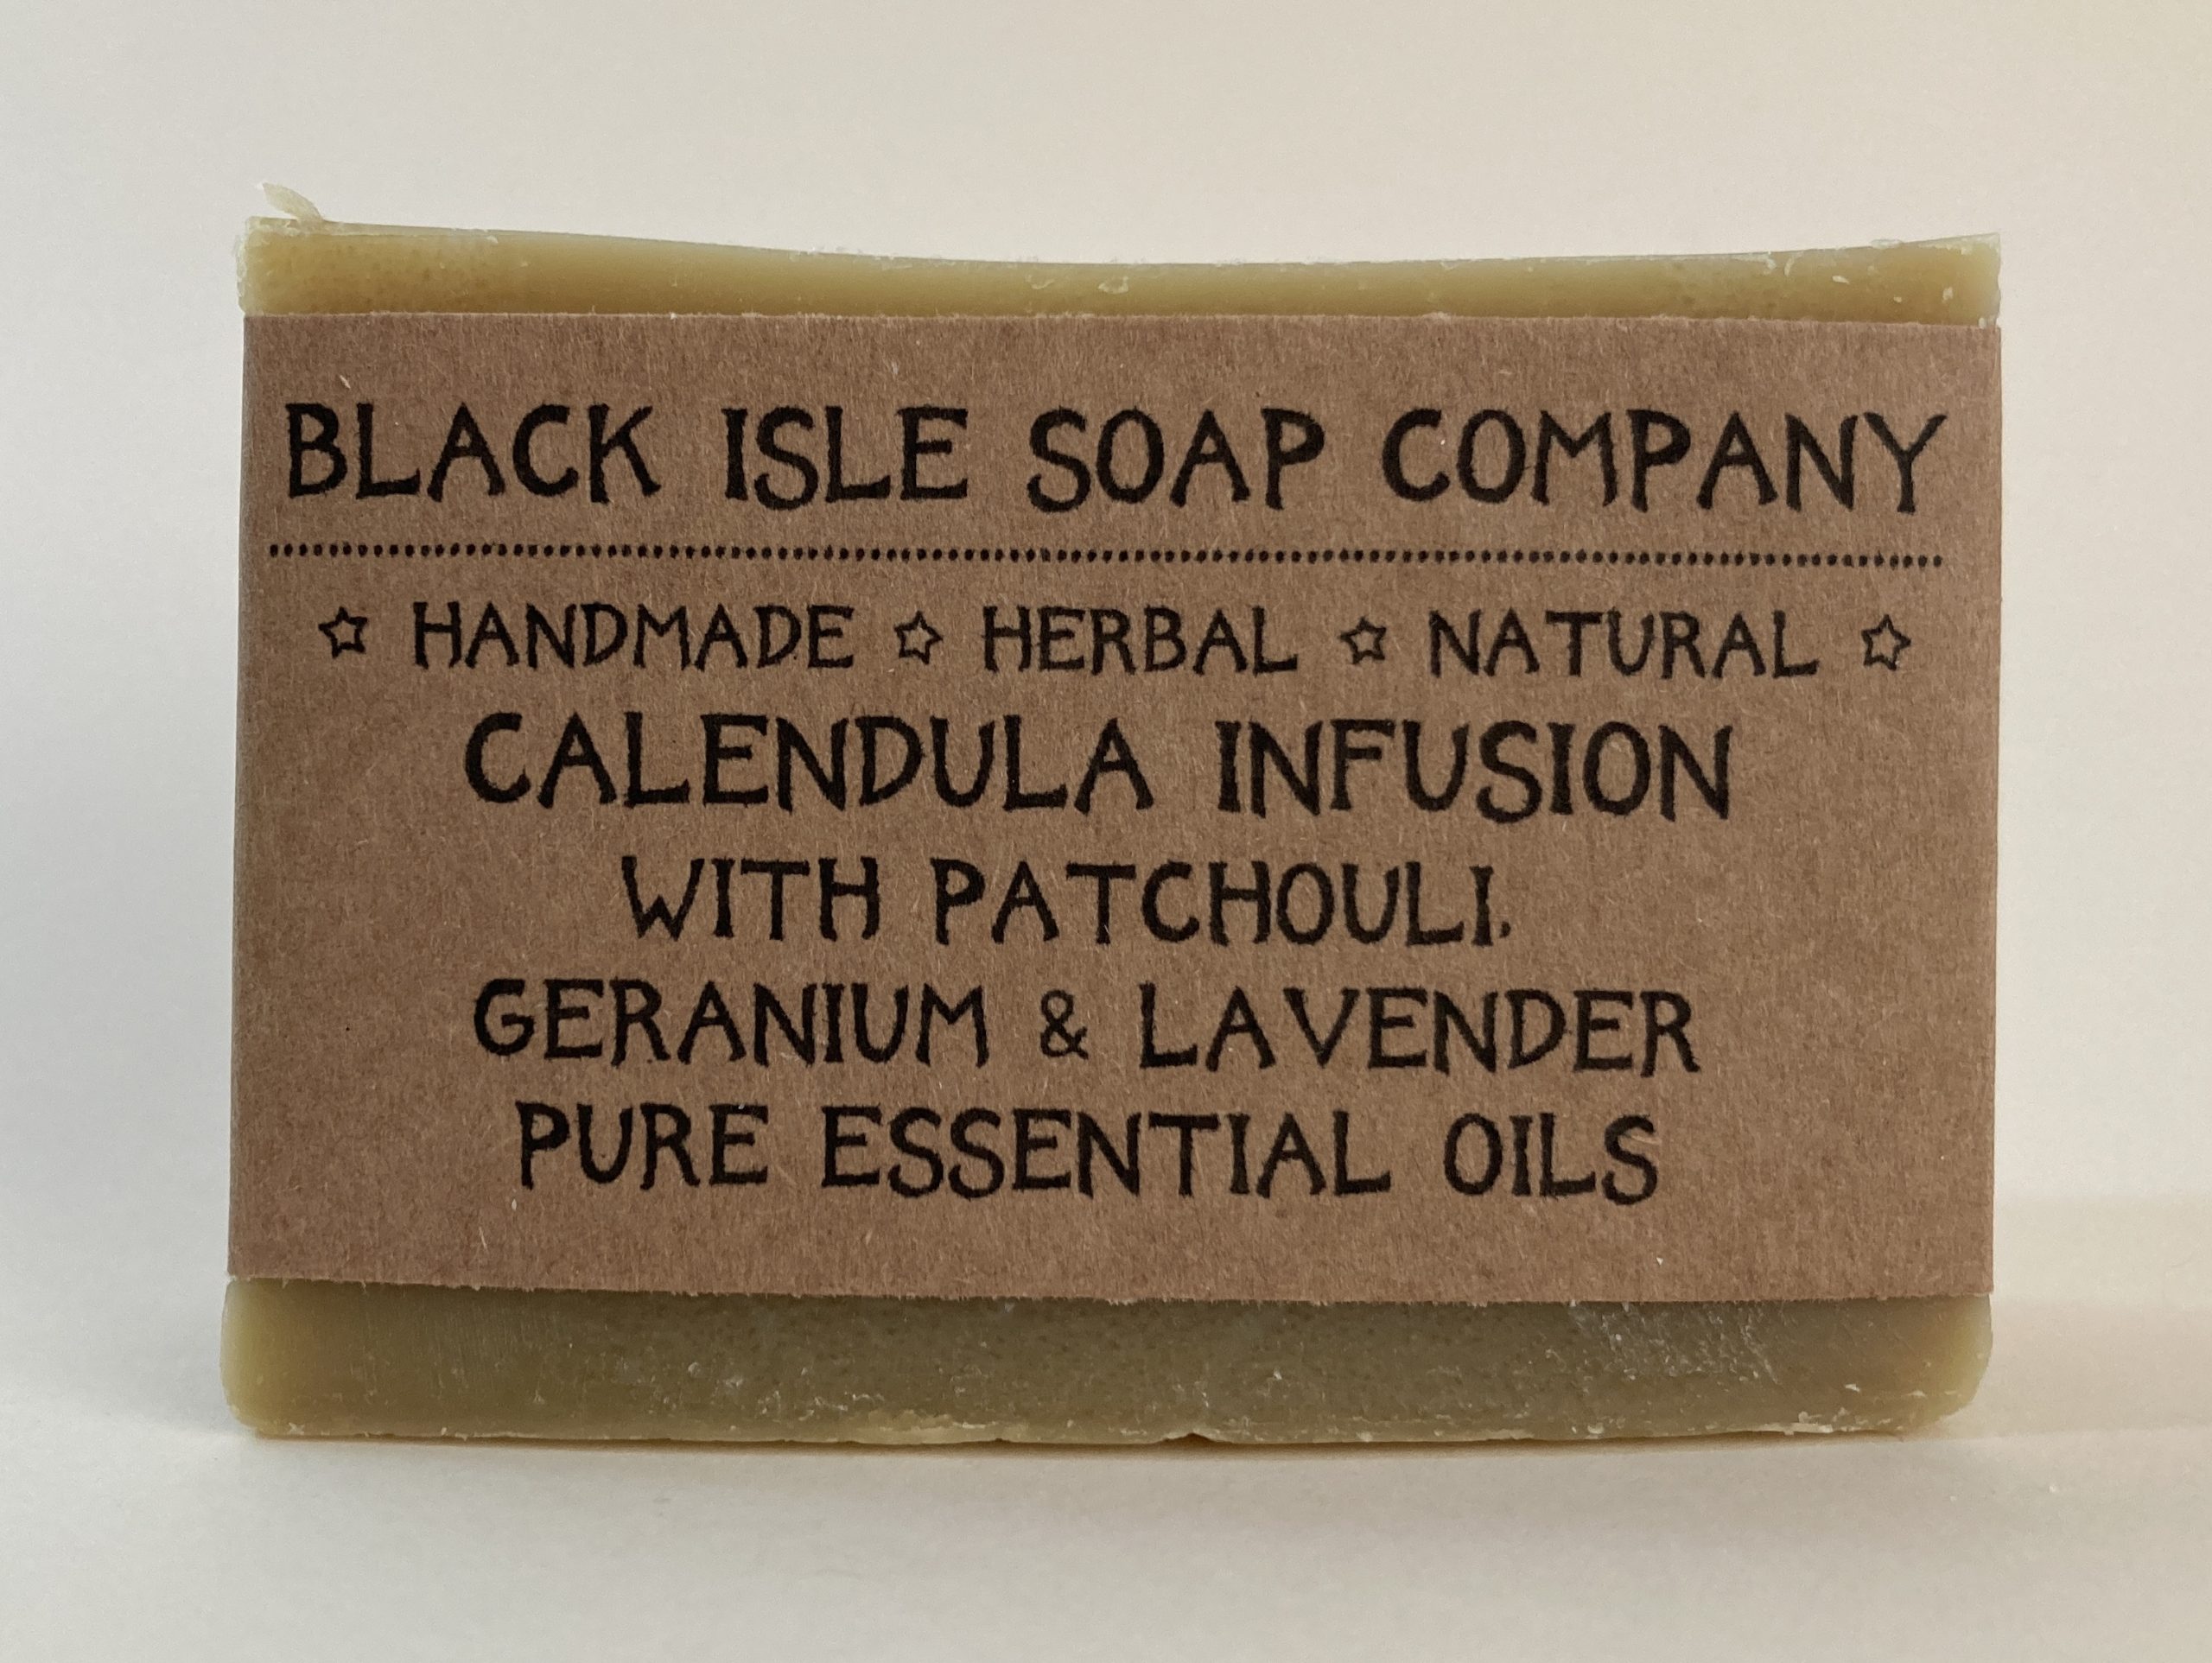 a light natural yellow coloured soap bar wrapped in brown paper scented with patchouli, geranium and lavender. This smells so good, with the sensual musky tones of the patchouli lifted with the fresh sweet lavender.